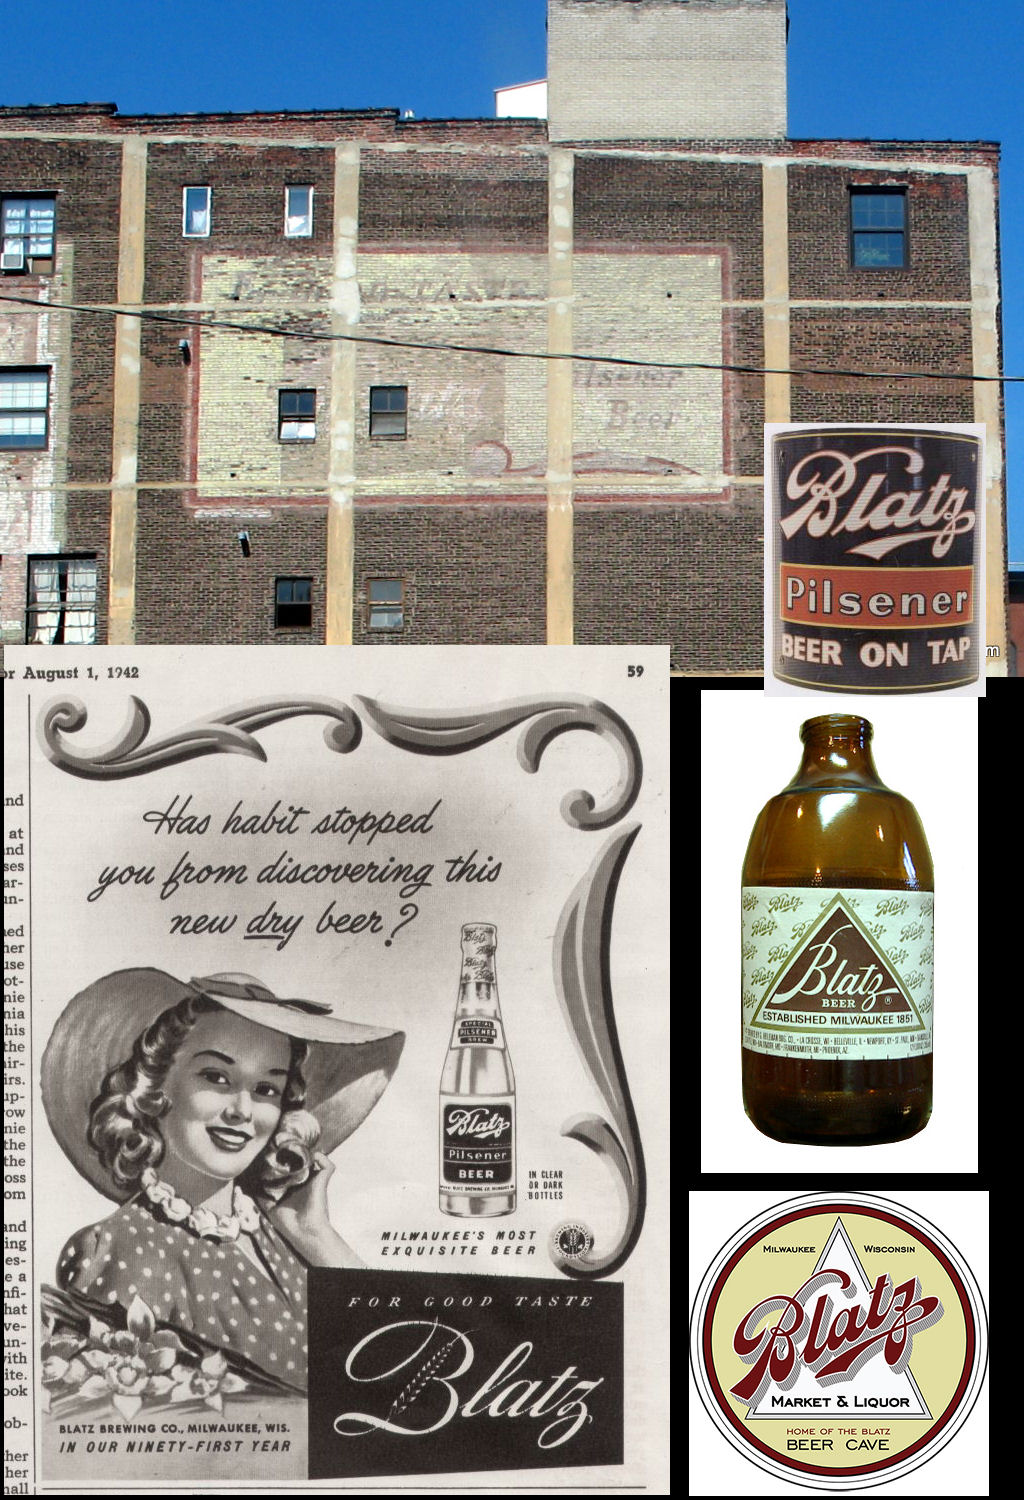 The beer brand on the sun faded advertisement was Milwaukee brewed, Blatz Beer. After doing some digging using Google, I found a key advertisement from a 1942 magazine article about Blatz Beer.